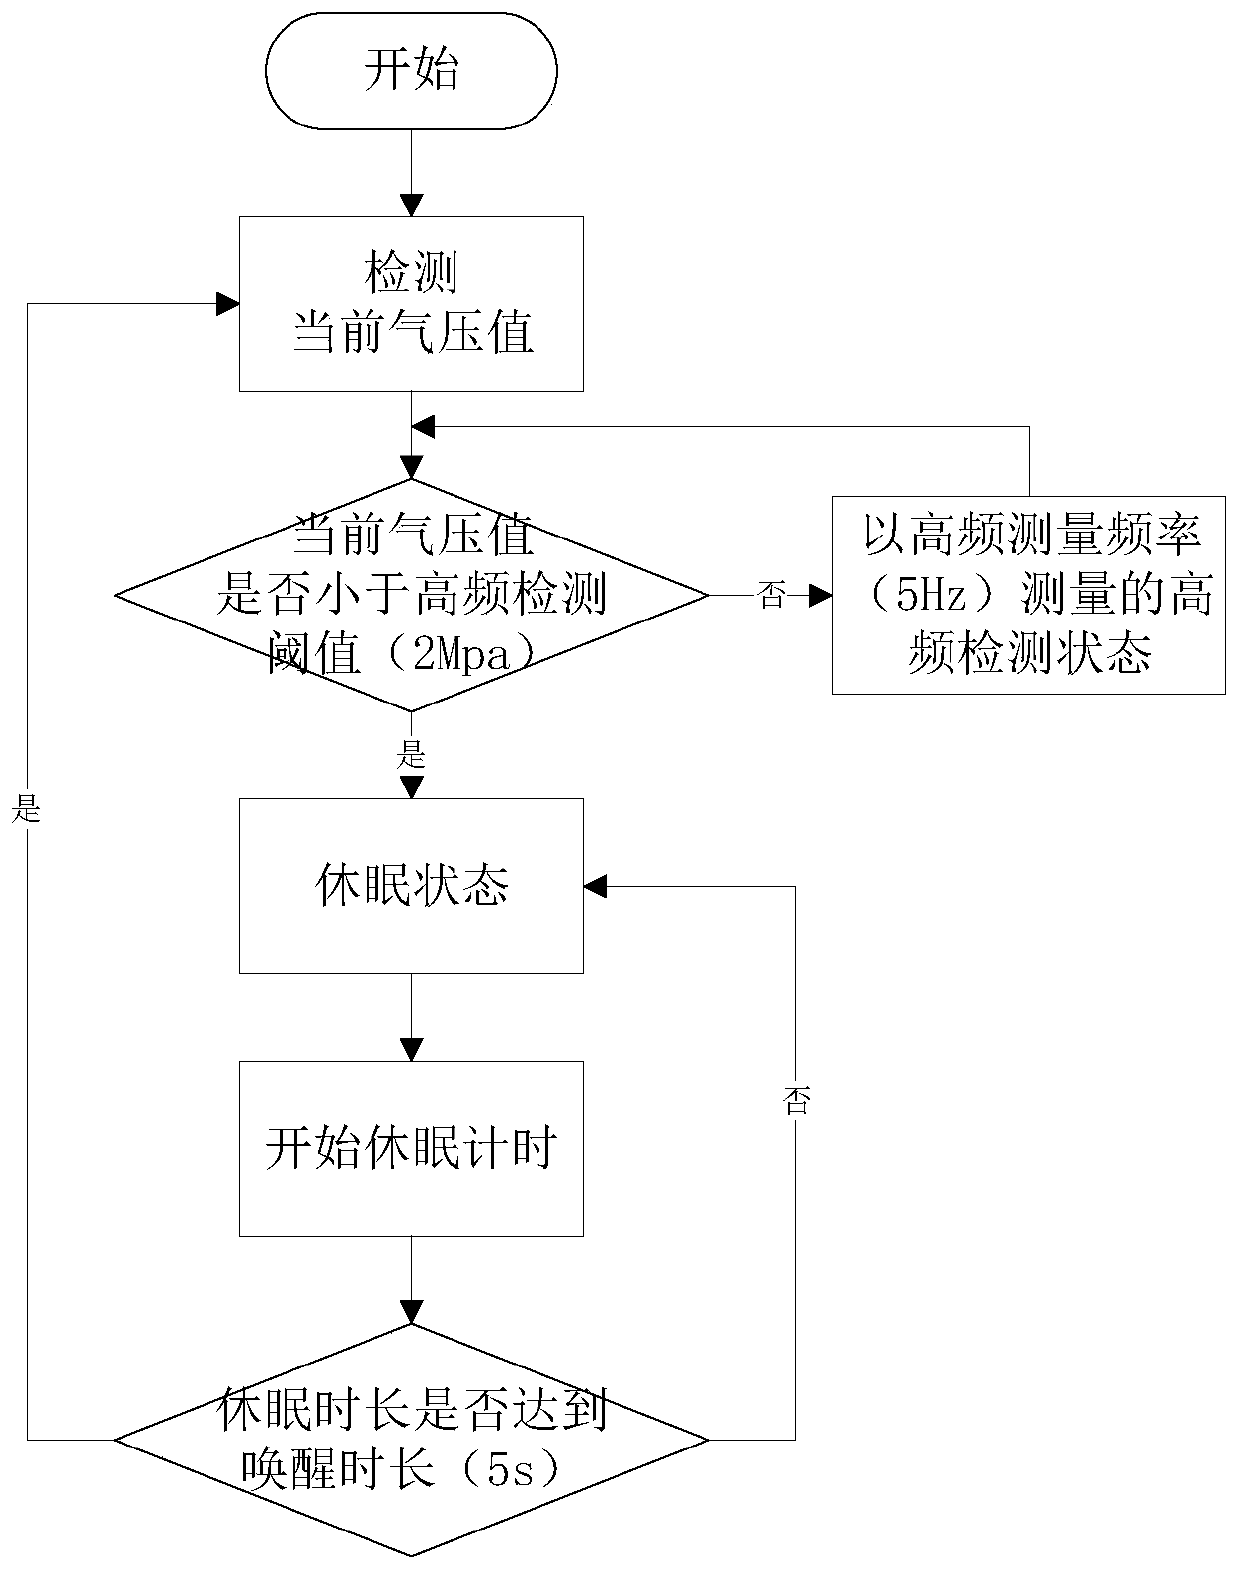 Low-power consumption gas cylinder gas pressure detection method, device, electronic equipment and medium